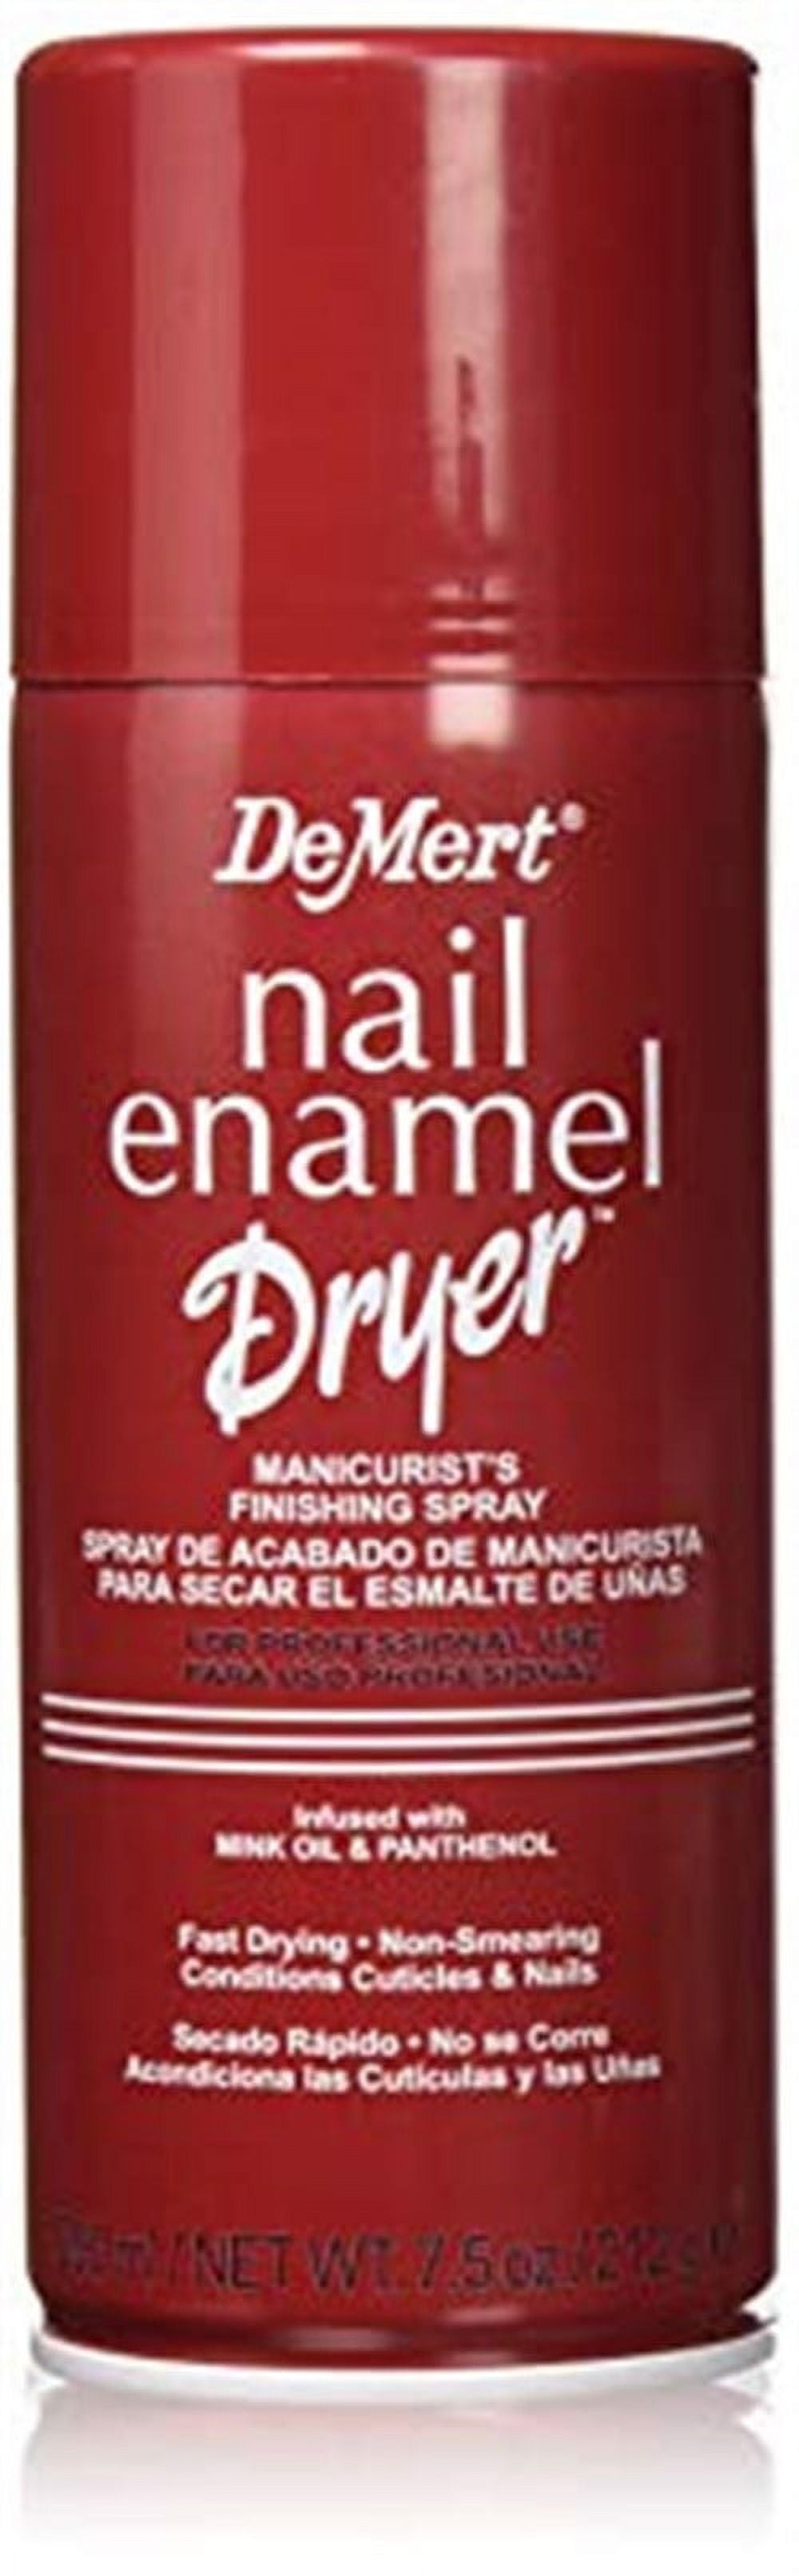 OPI RapidDry Nail Polish Drying Top Coat Spray, Quick Drying, Help Restore  Shine & Dries Nails for Smudge Proof Finish, 60 Second Drying Time, 1.8 fl  oz : Beauty & Personal Care - Amazon.com